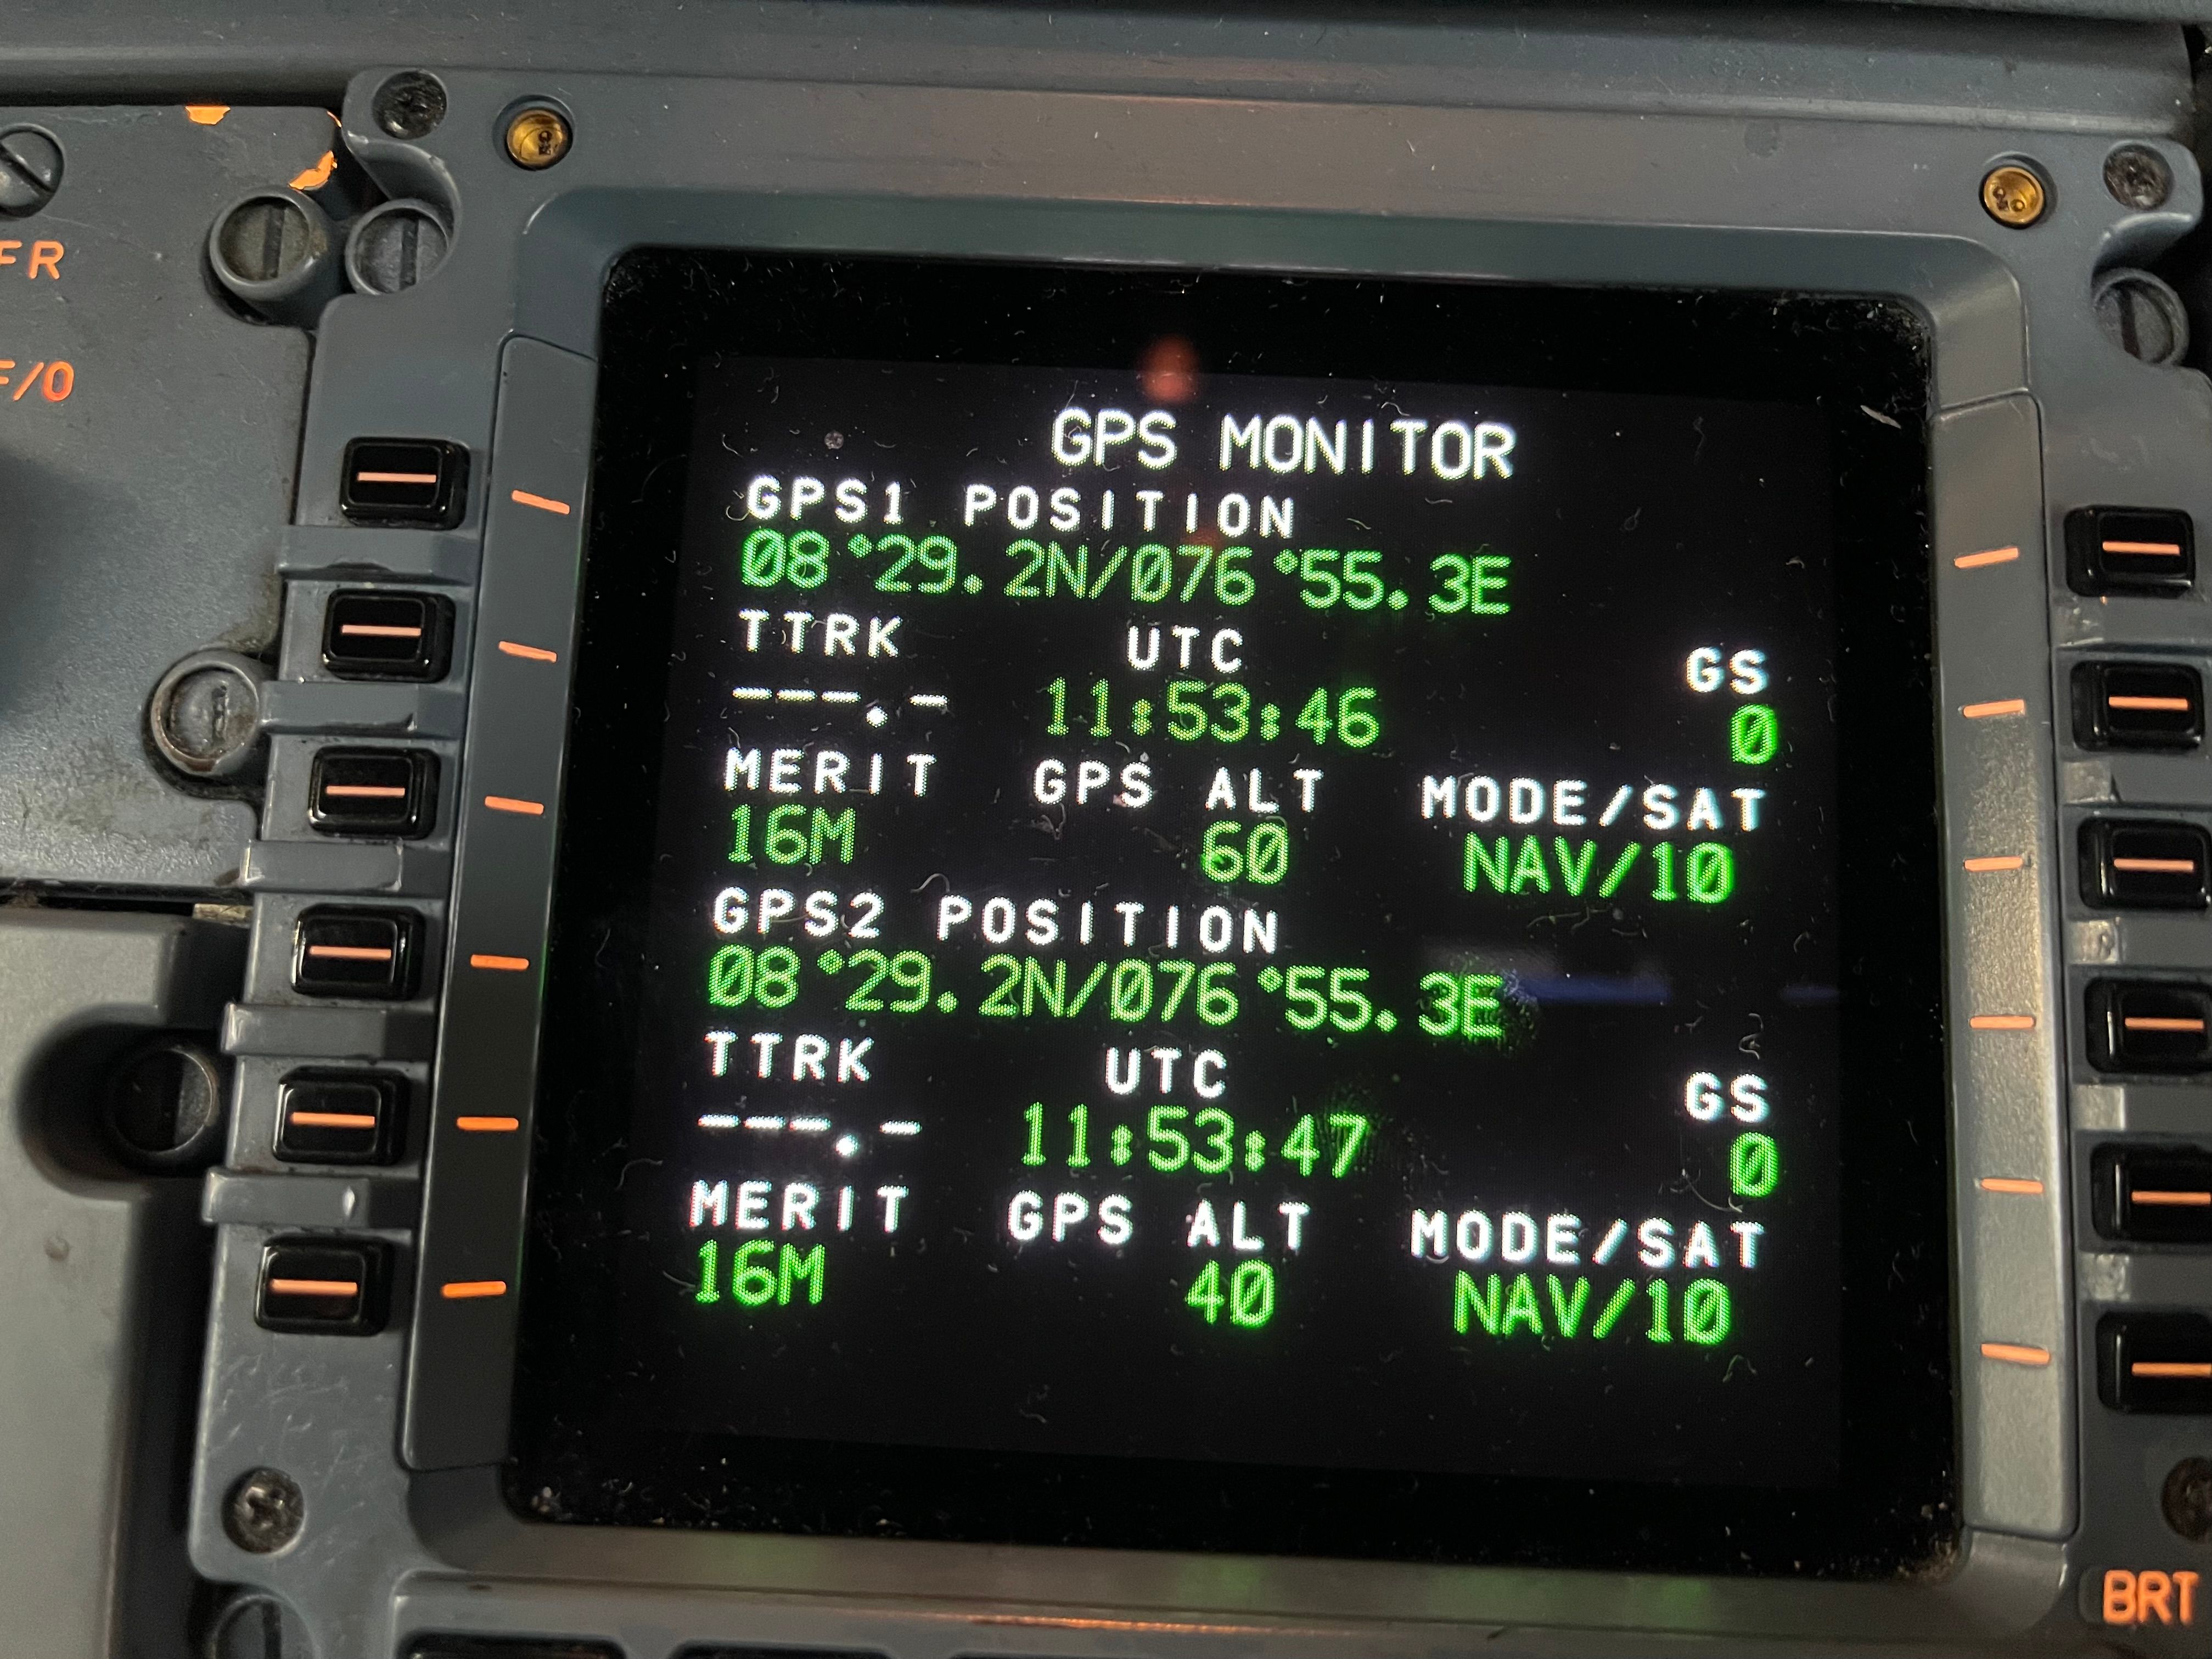 The GPS monitor on an A320 FMS.